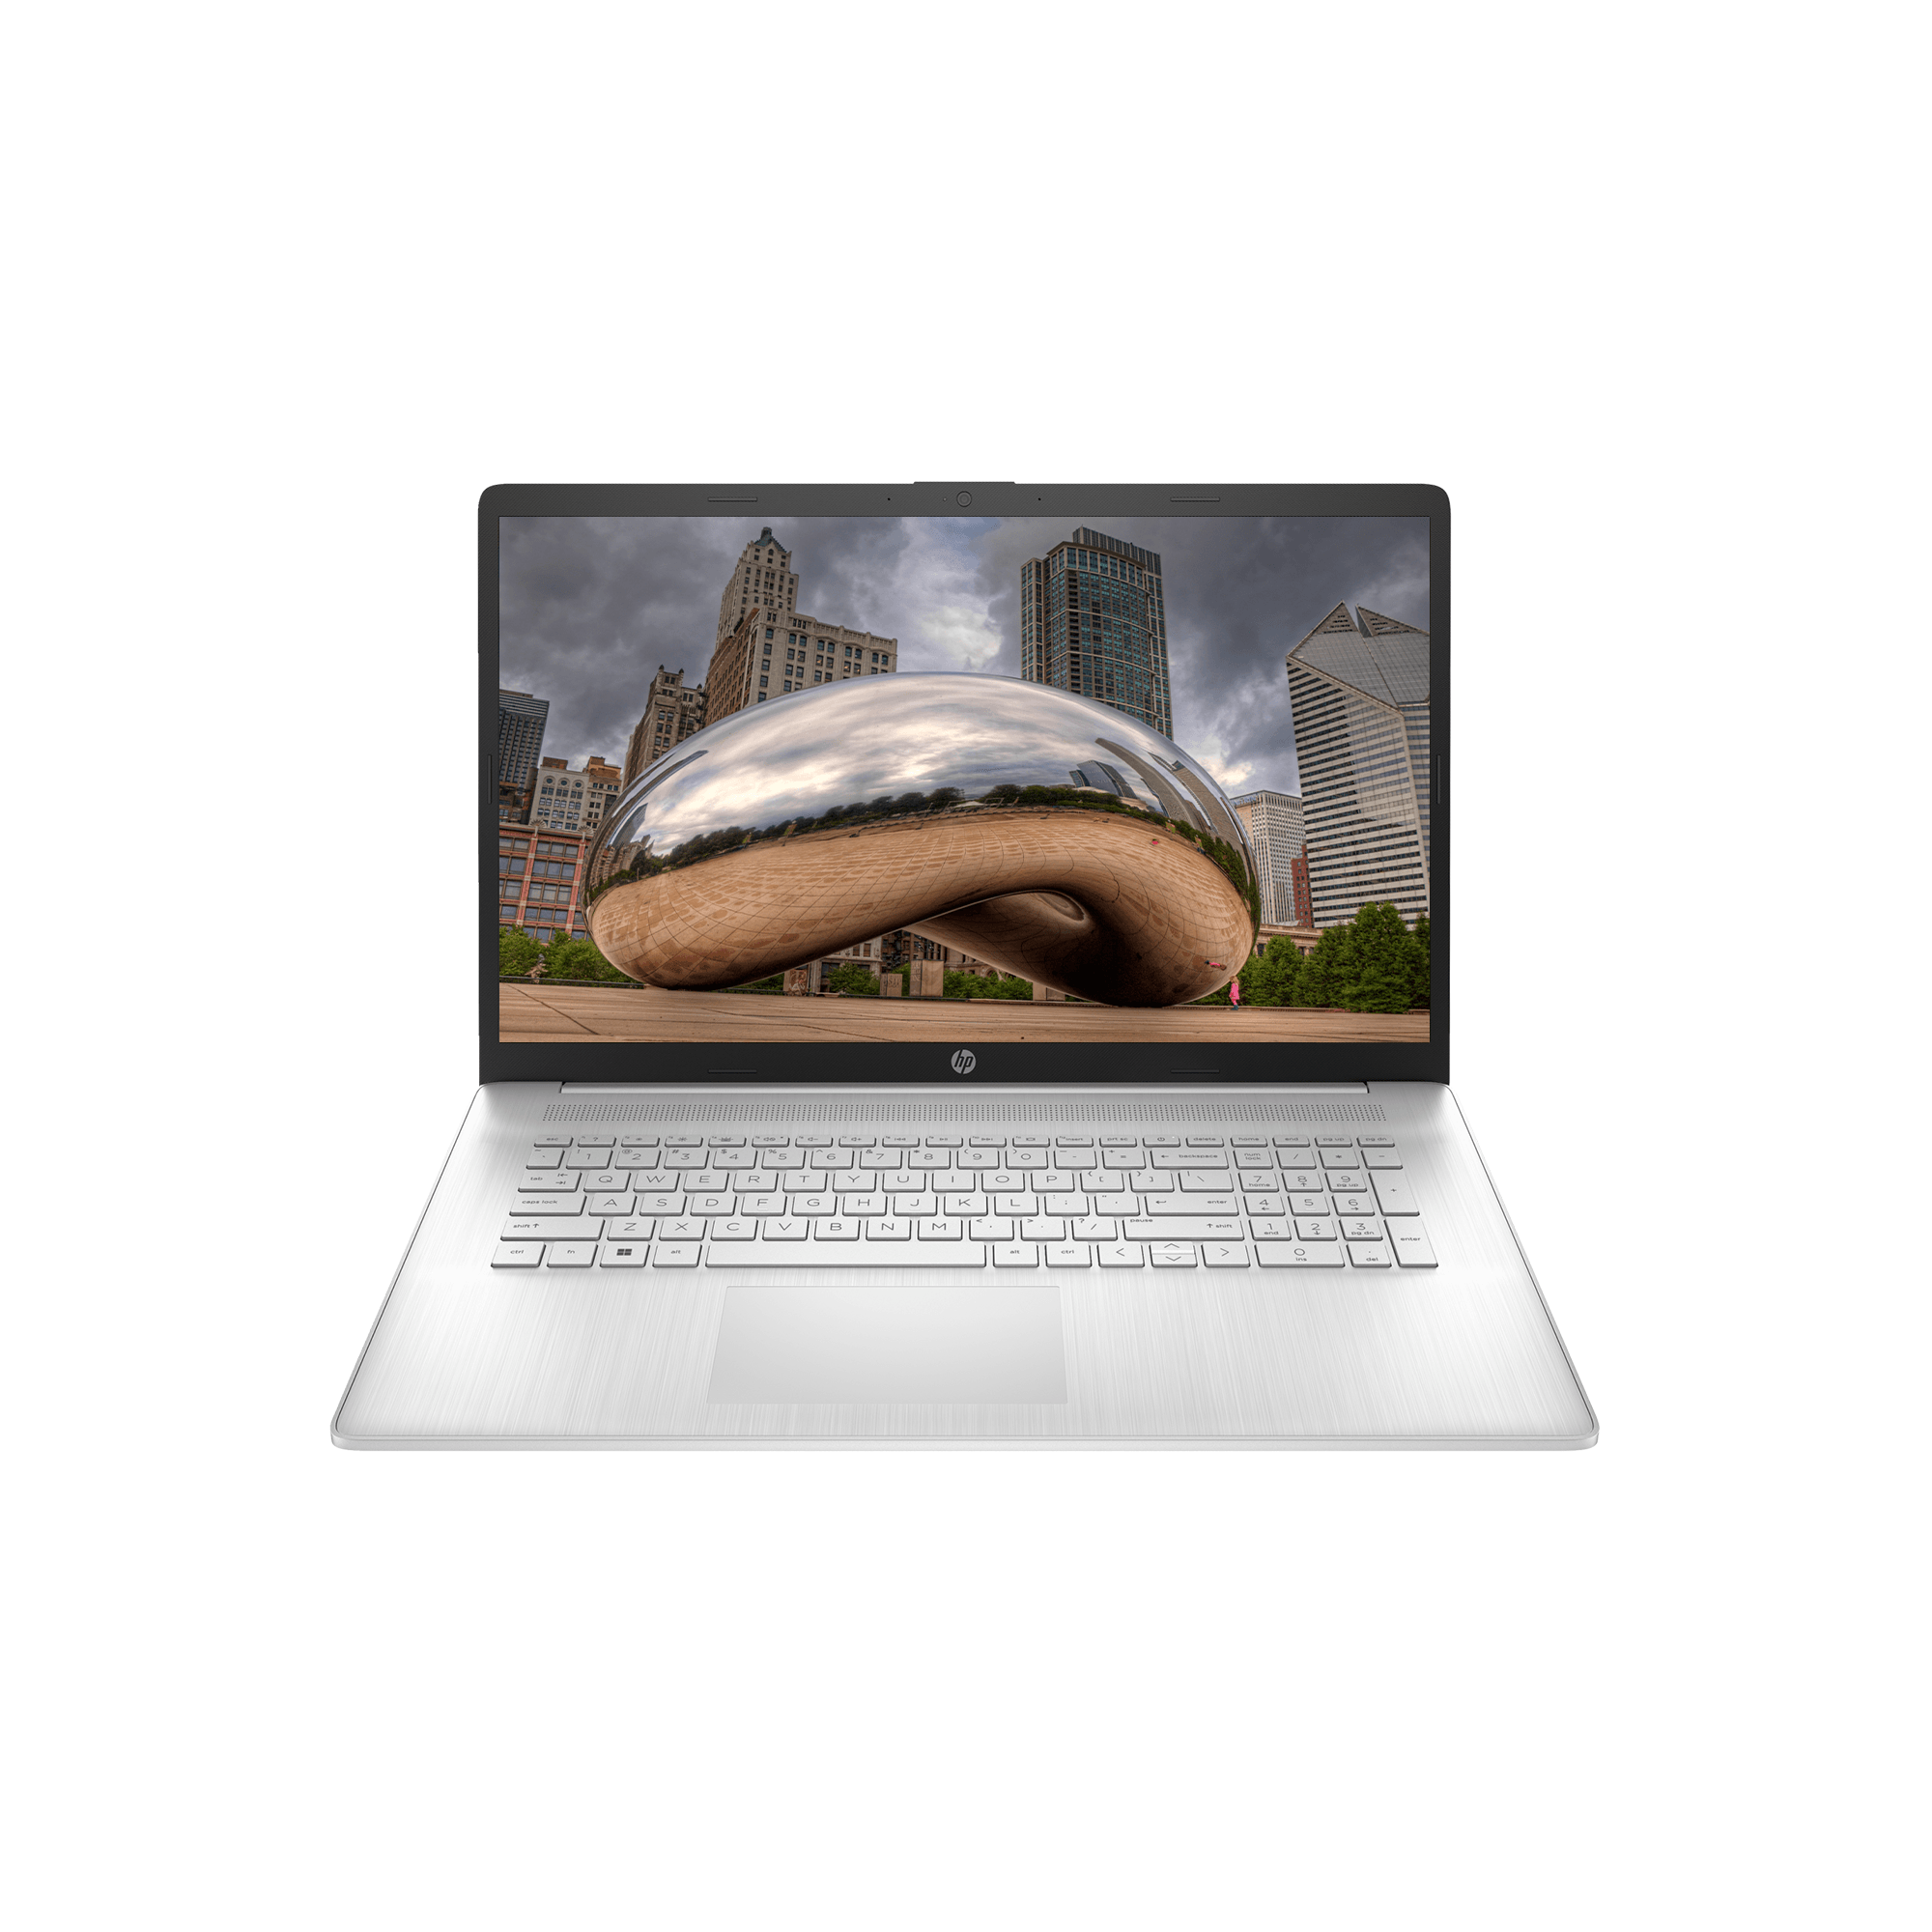 Hp 17t Laptop, Intel Core i7-1165G7, 17.3" HD+ (1600X900) Touch, Windows 11 Home,Silver